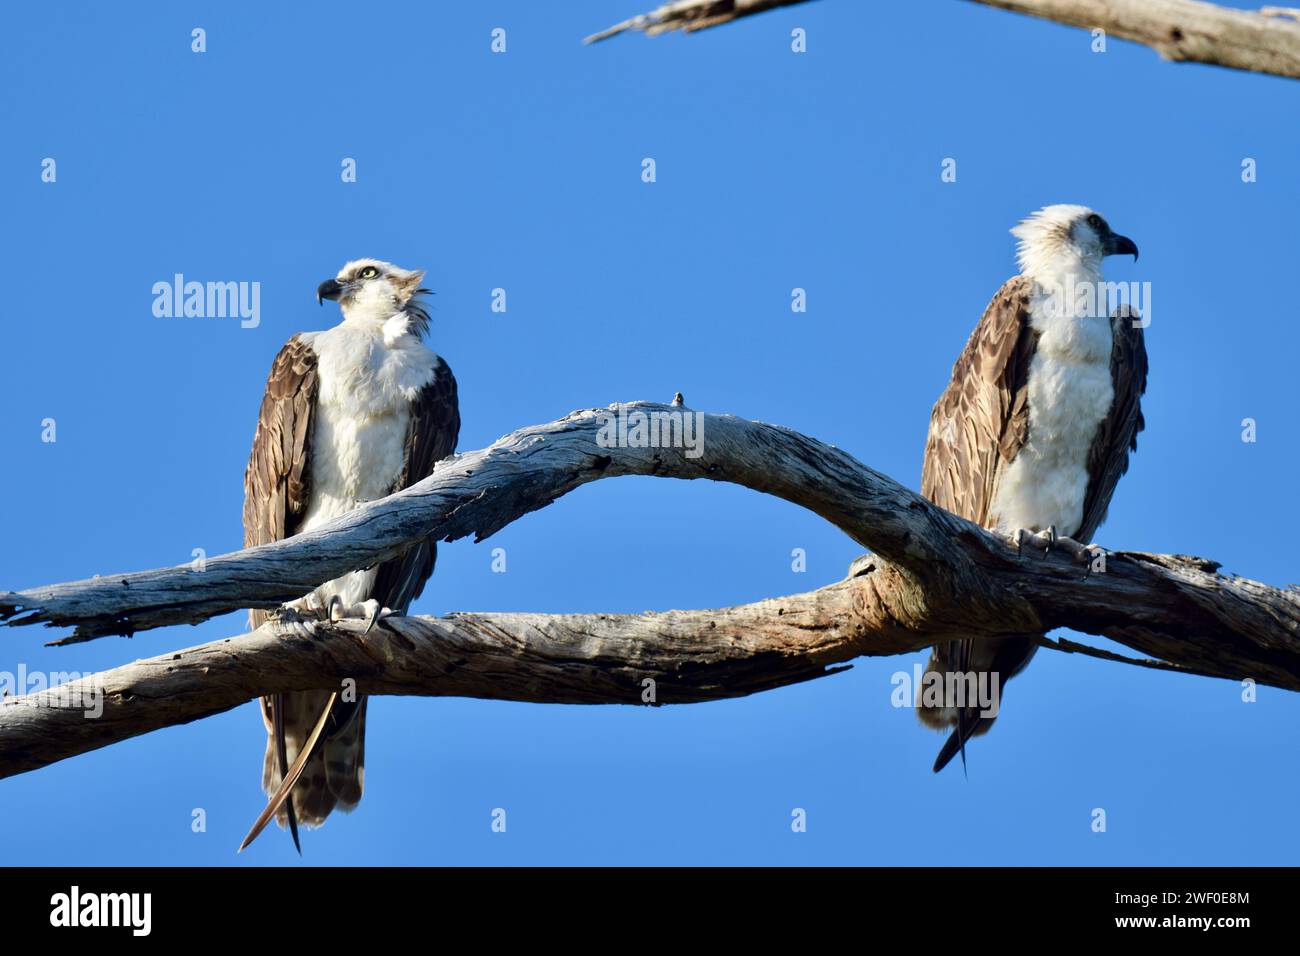 Two Osprey (Pandion haliaetus),also called sea hawk, river hawk, or fish hawk, perched in a tree with a blue sky in the background. San Pedro, Belize. Stock Photo